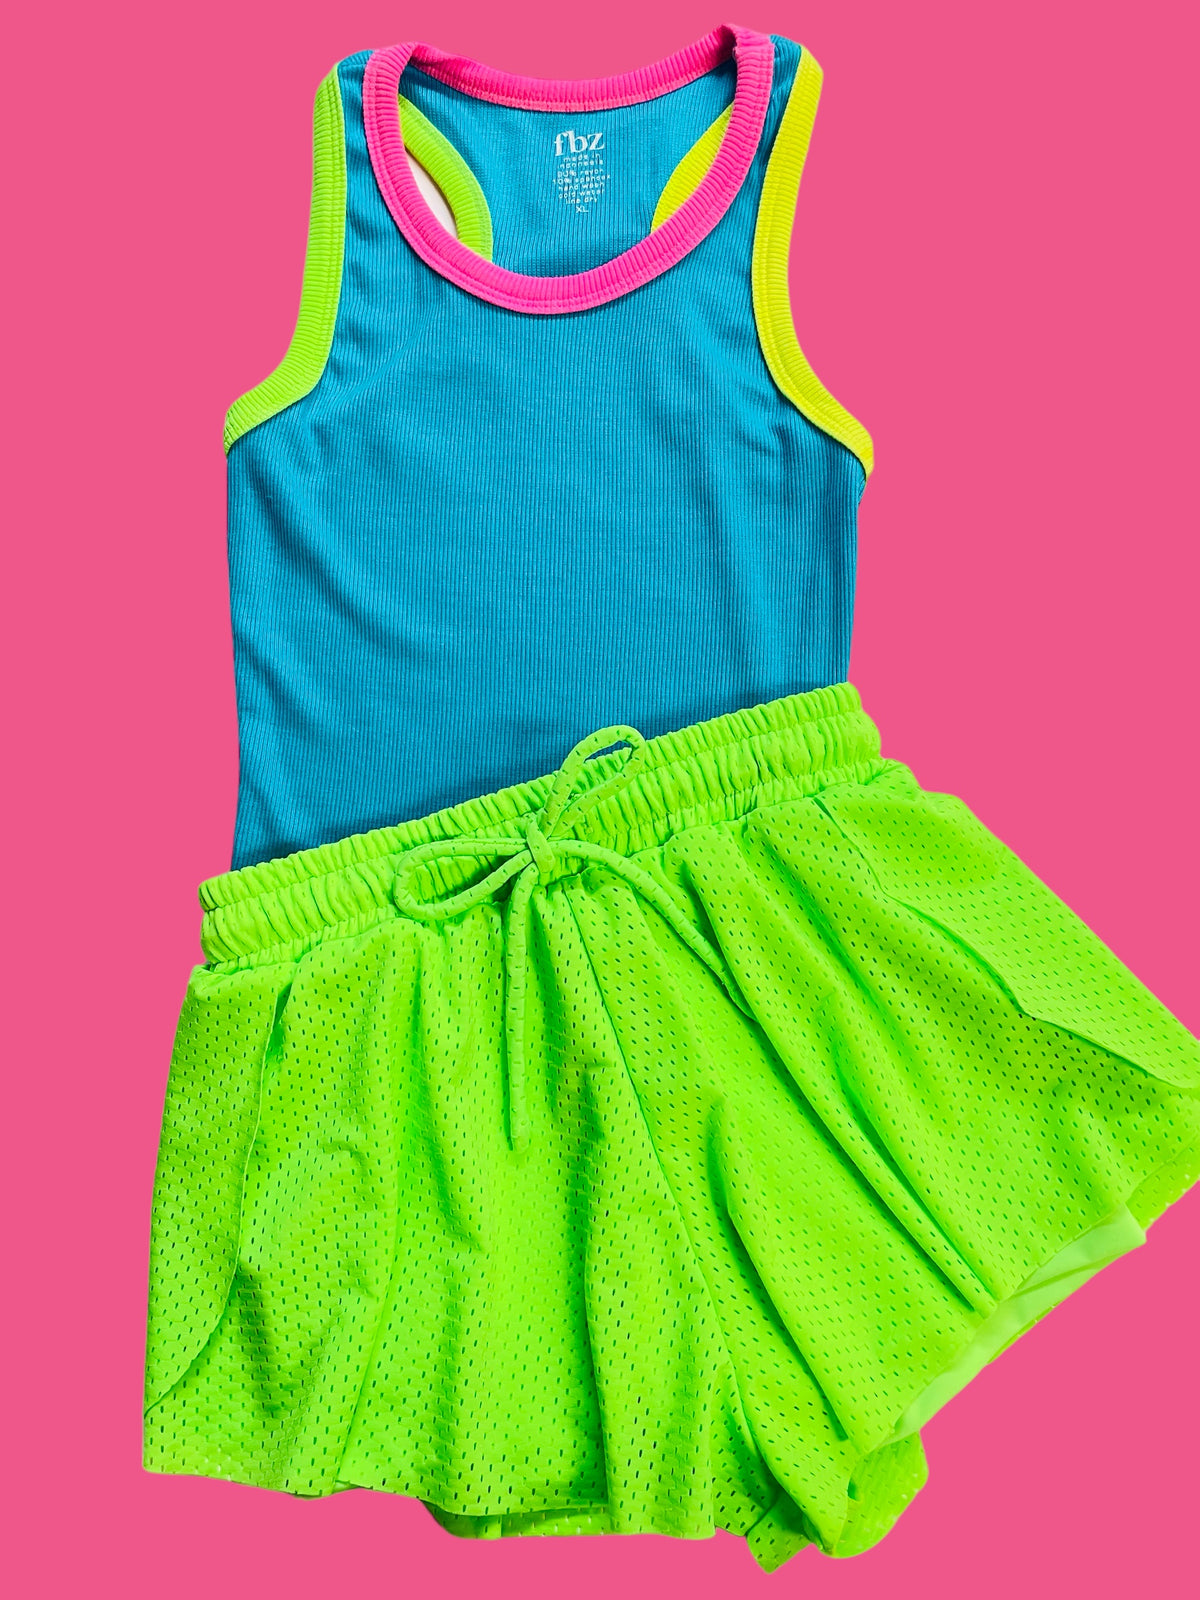 Flowers By Zoe Turquoise &amp; Neon Colorblock Tank